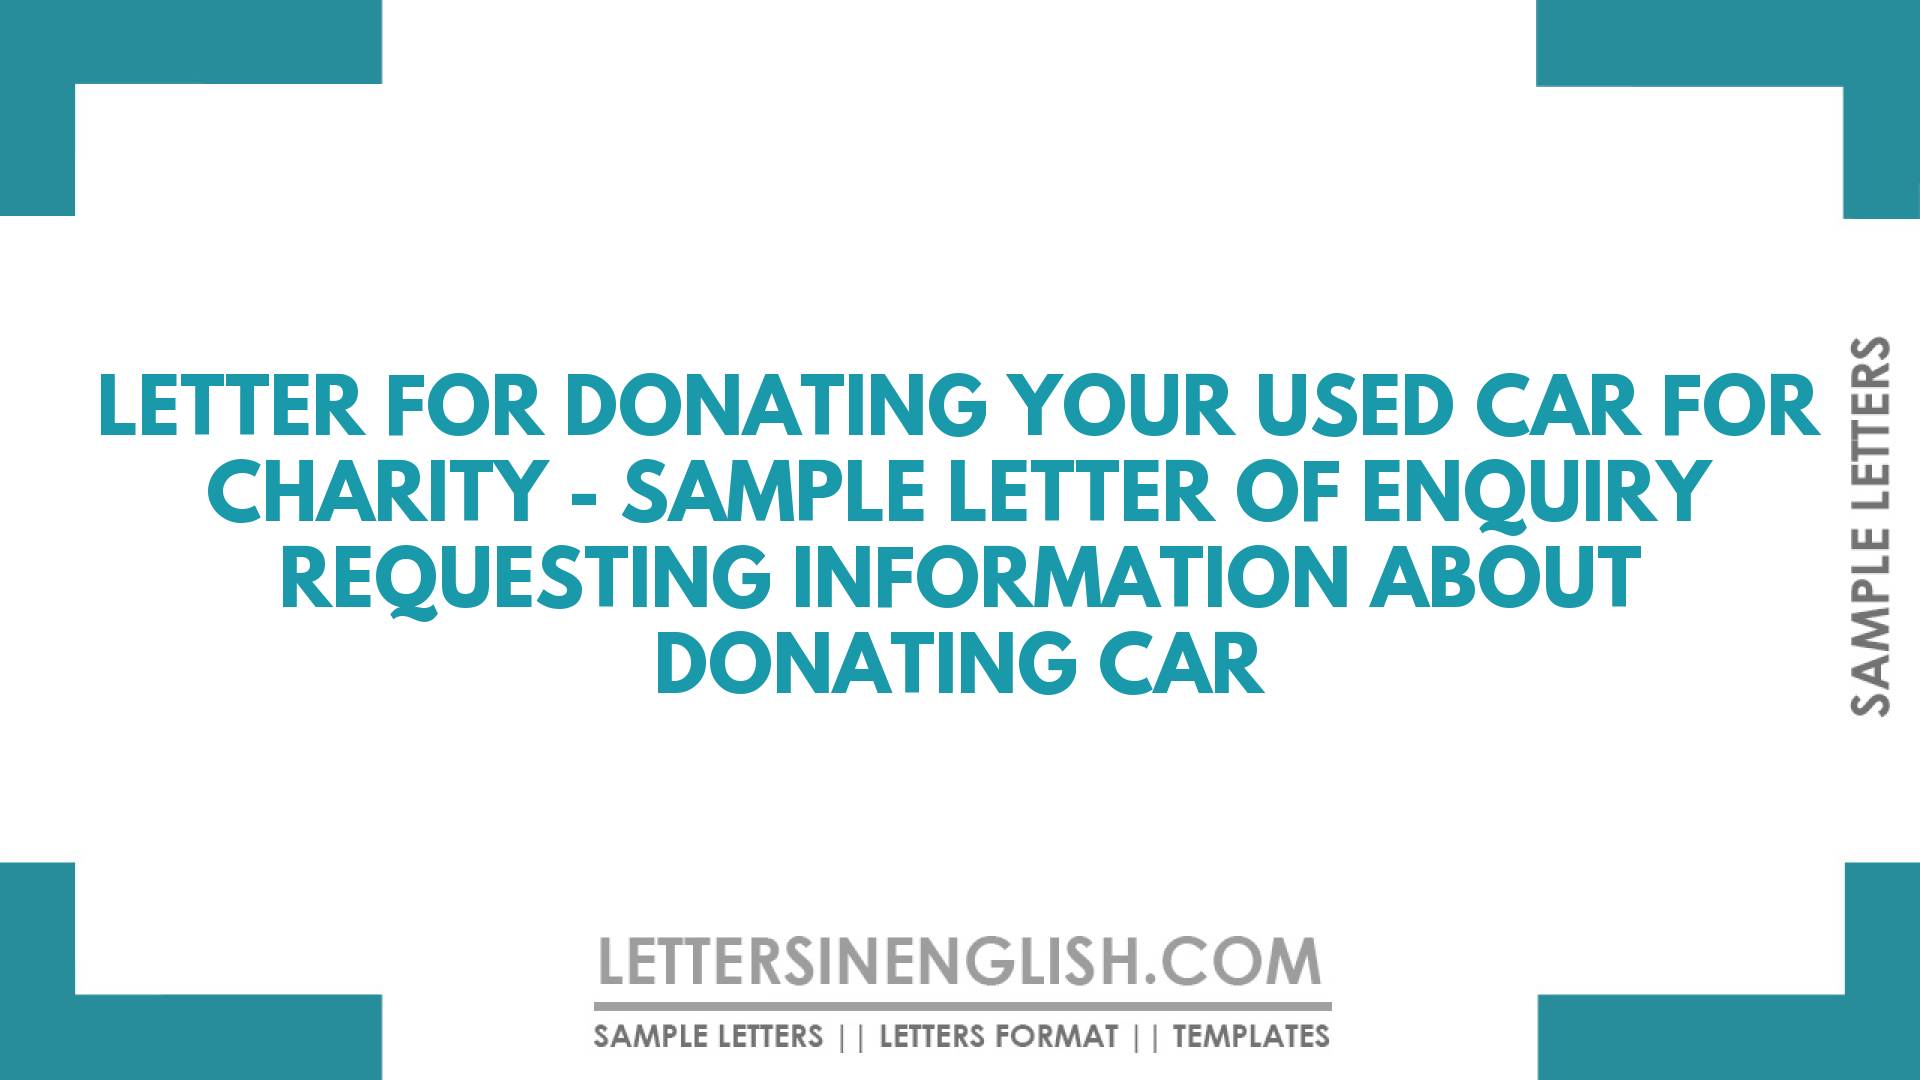 Letter for Donating your Used Car for Charity – Sample Letter of Enquiry Requesting Information About Donating Car